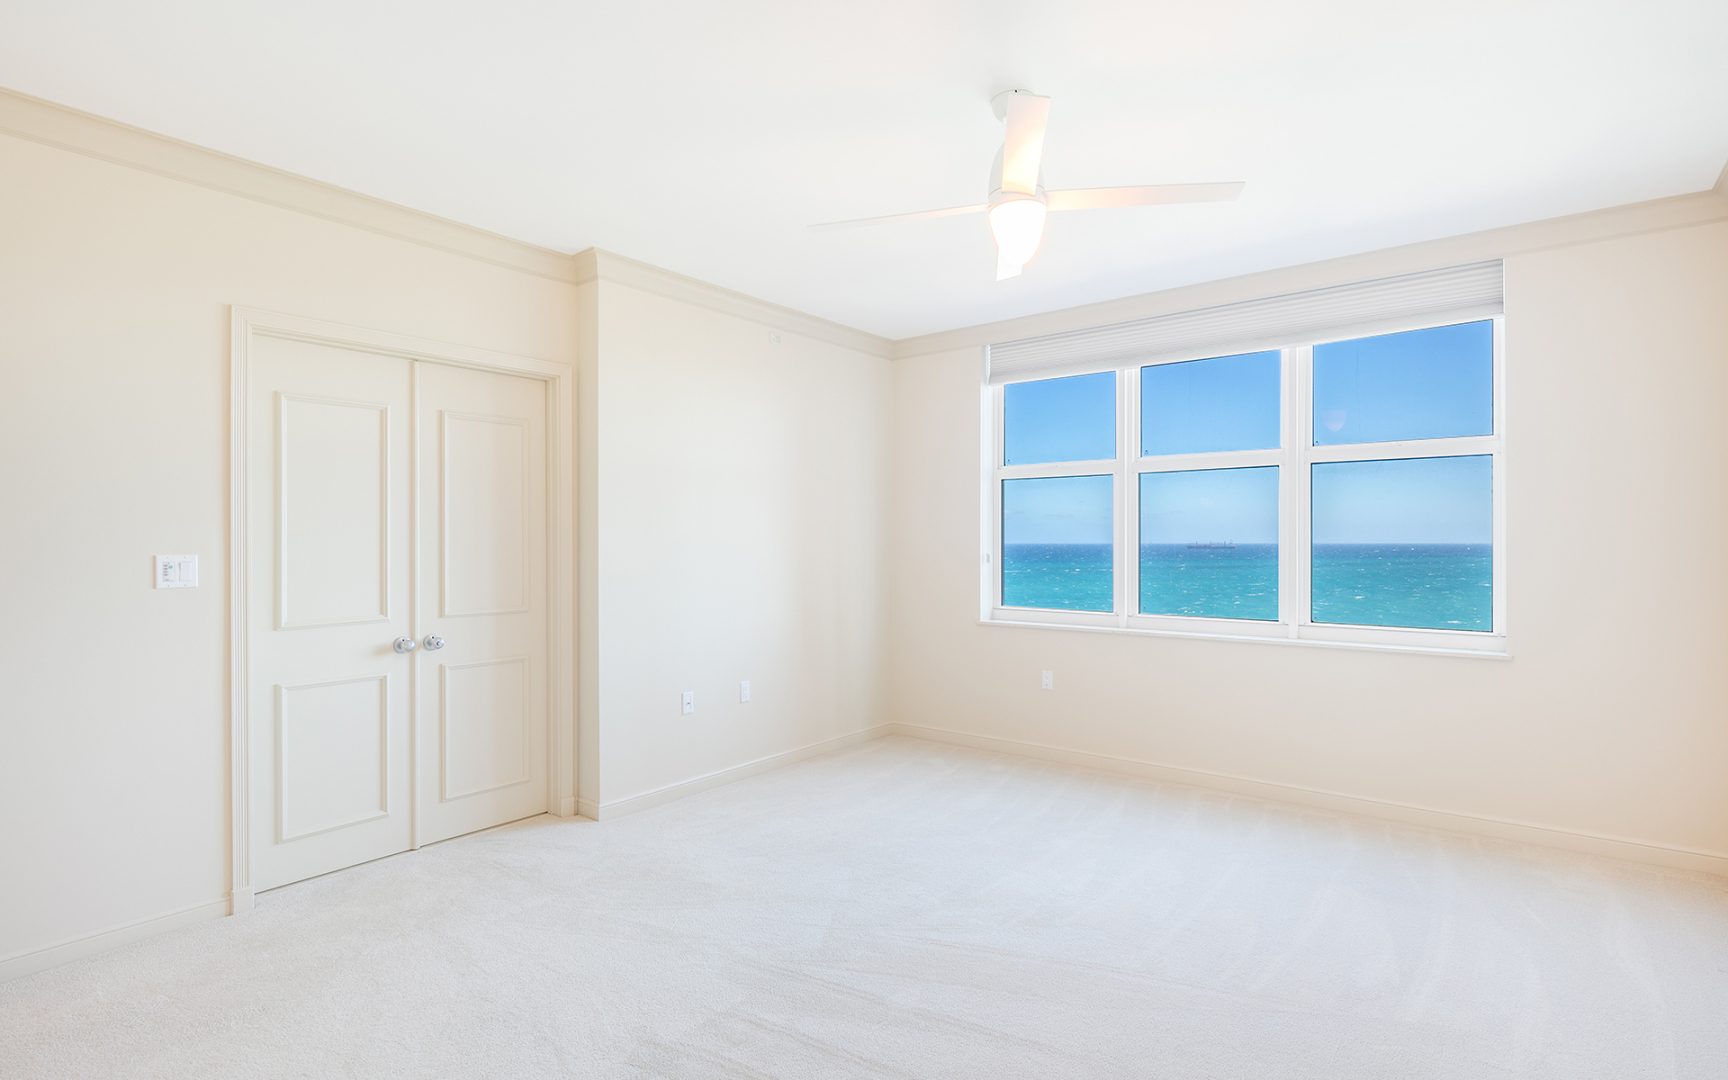 Residence 15D, Tower II at The Palms, Luxury Oceanfront Condos in Fort Lauderdale, Florida 33305.